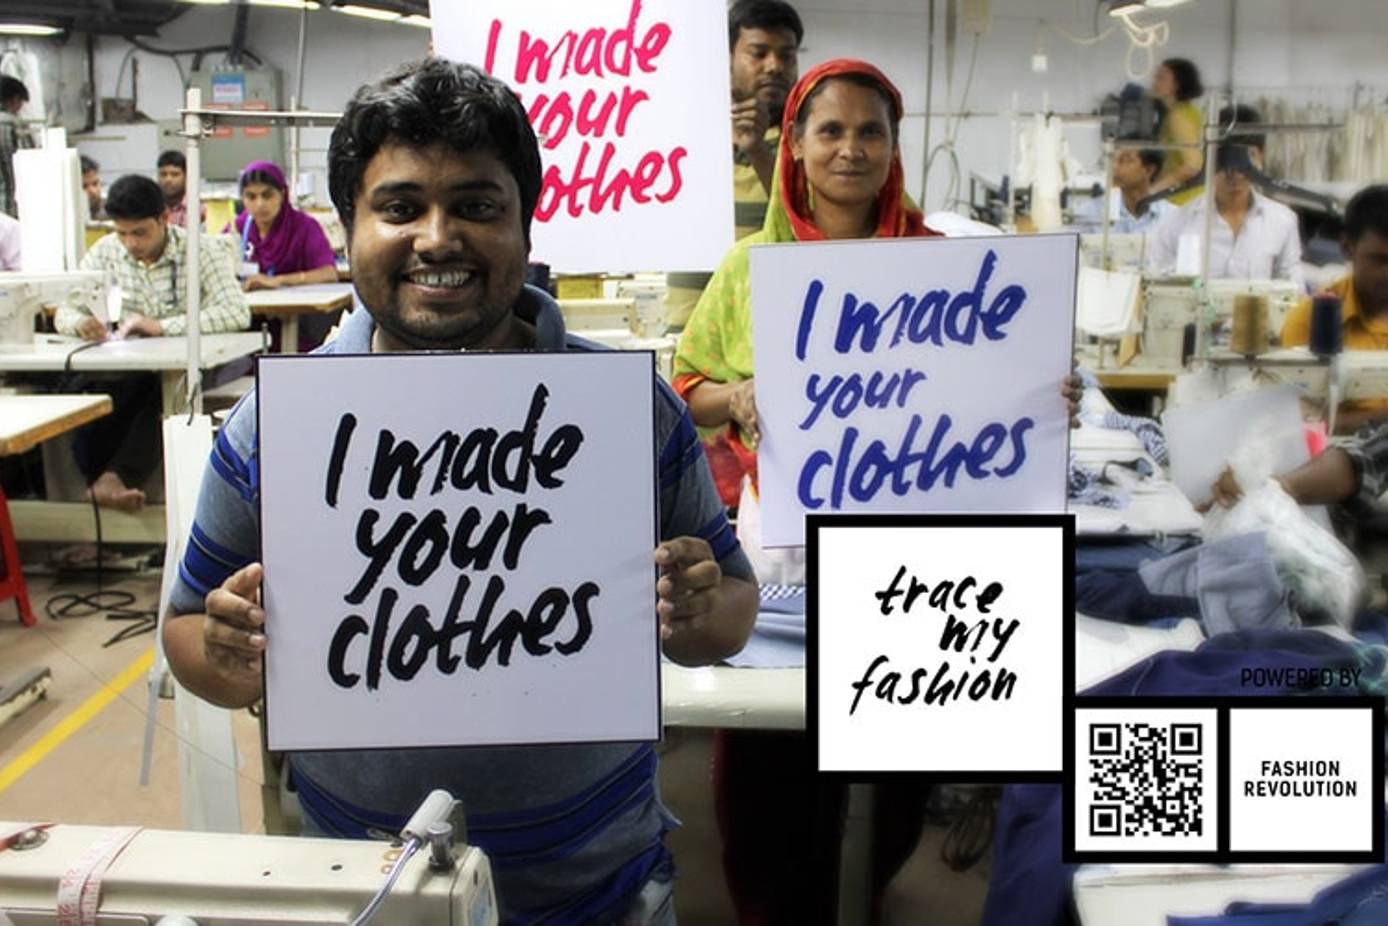 FashionRevolution: Time to Trace Fashion by asking Who Made My